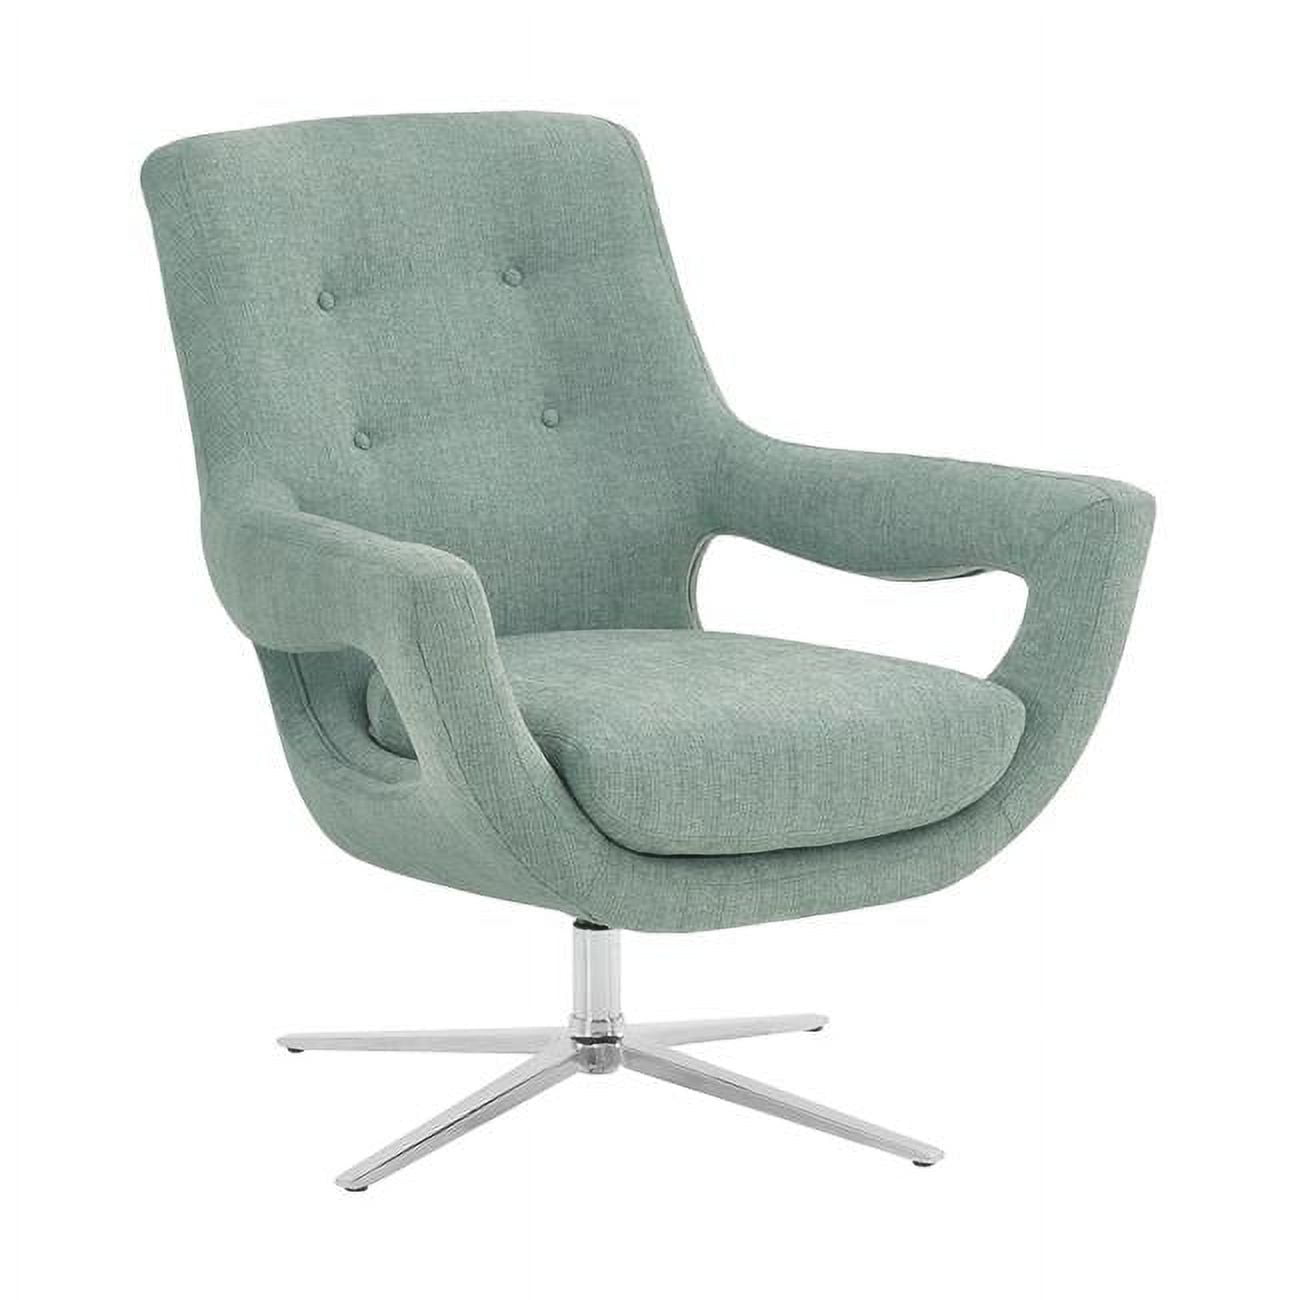 Picture of Armen Living LCQUCHSB Quinn Contemporary Adjustable Swivel Accent Chair, Polished Steel Finish with Spa Blue Fabric